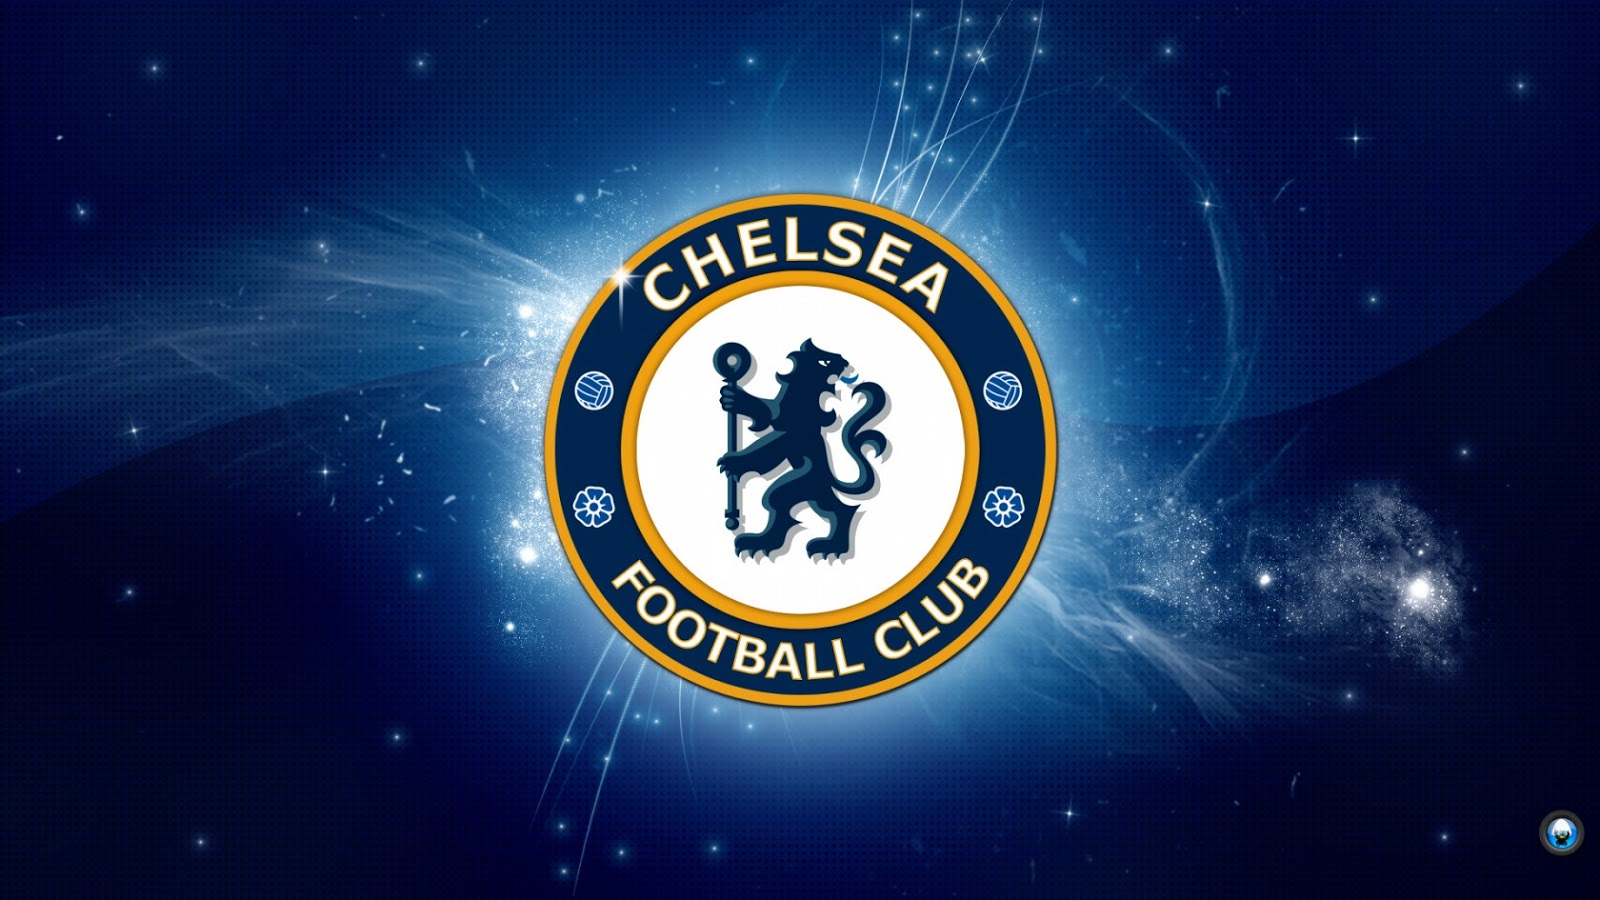 All Wallpapers: Chelsea FC Logo Wallpapers 20131600 x 900